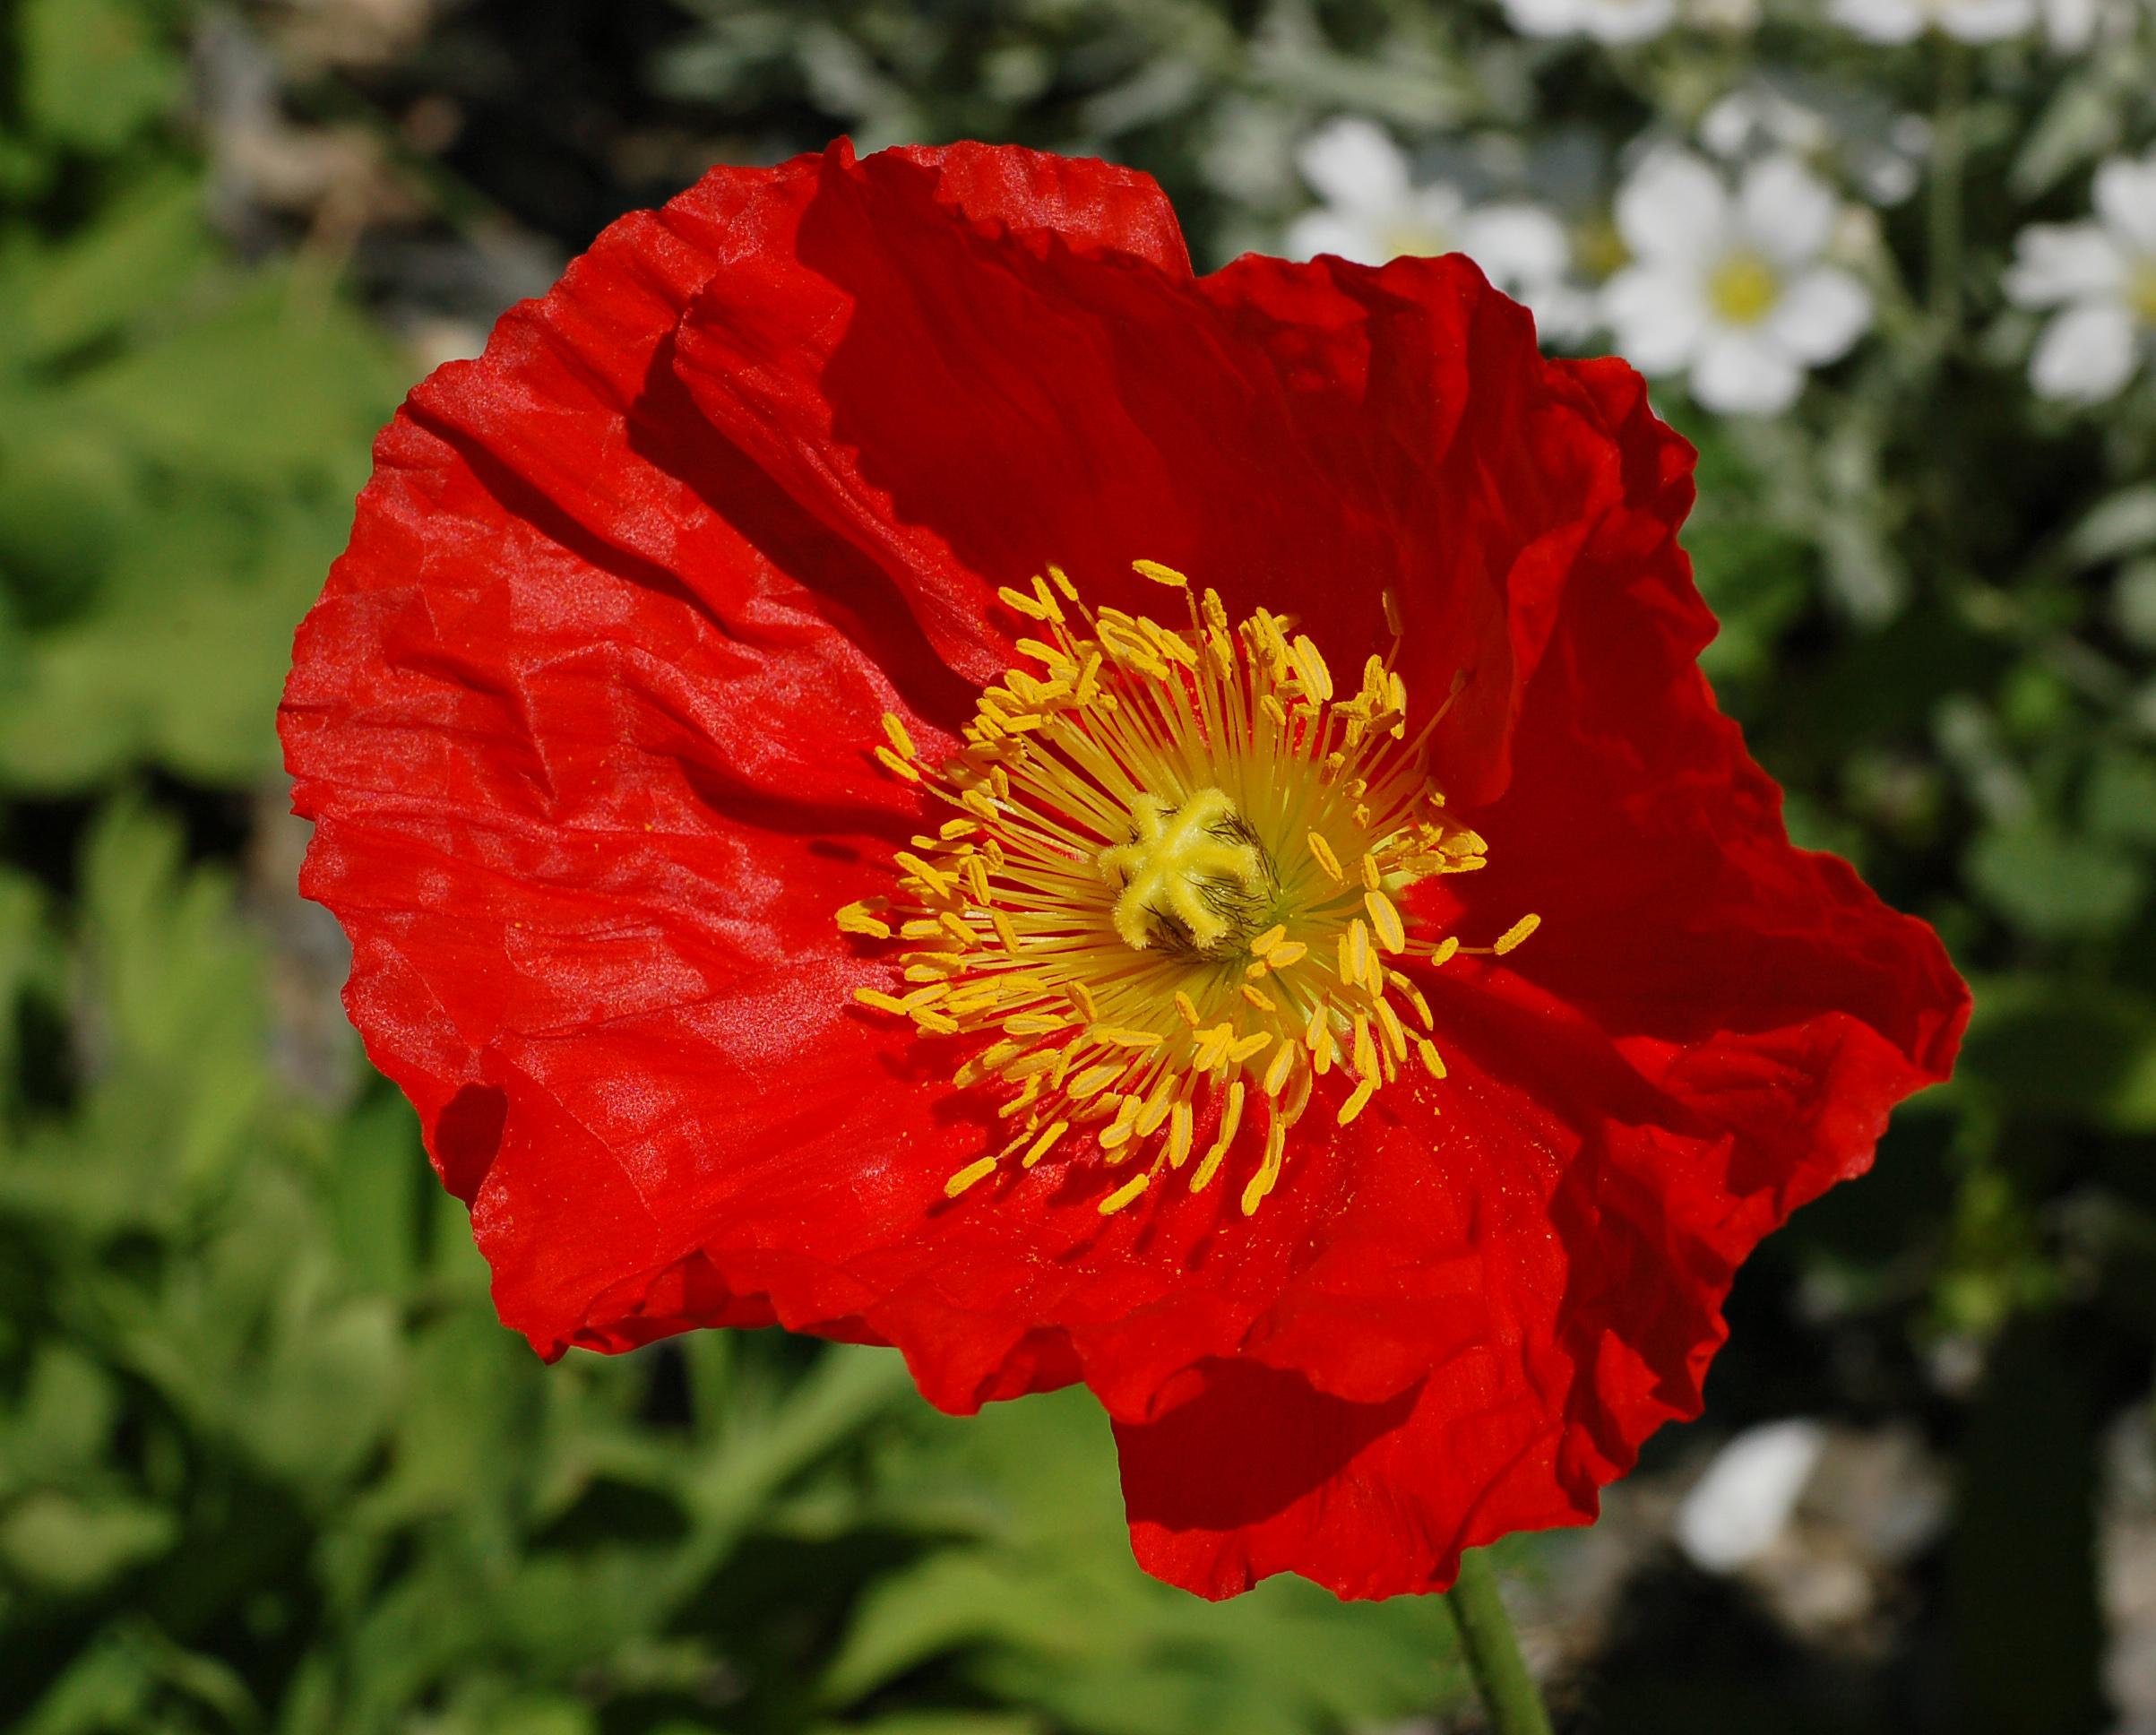 Red flower with yellow stigma and stamen, yellow-brown style and green stems.